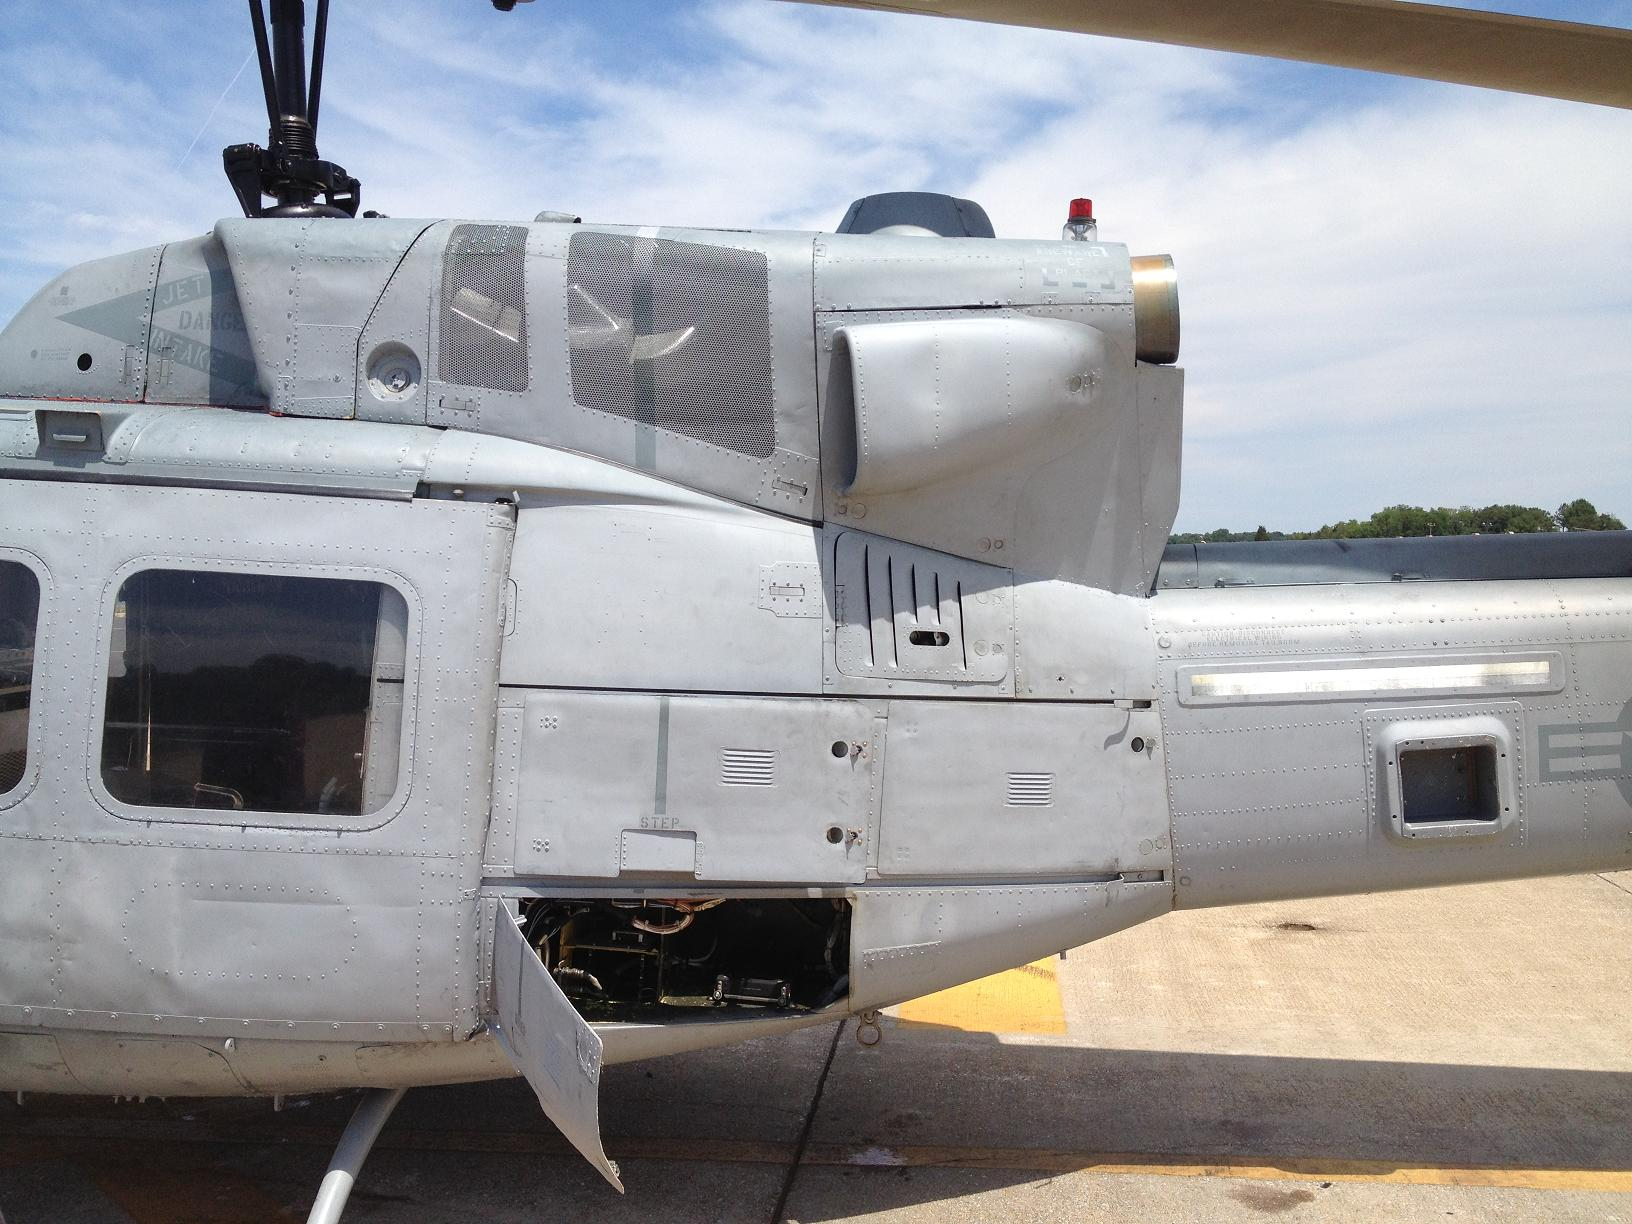 Wired and wireless corrosion monitoring sensor nodes were installed in the avionics bay of the Bell UH-1N Twin Huey T-Rex rotorcraft test bed at the NACRA. Photo courtesy of Luna Innovations.